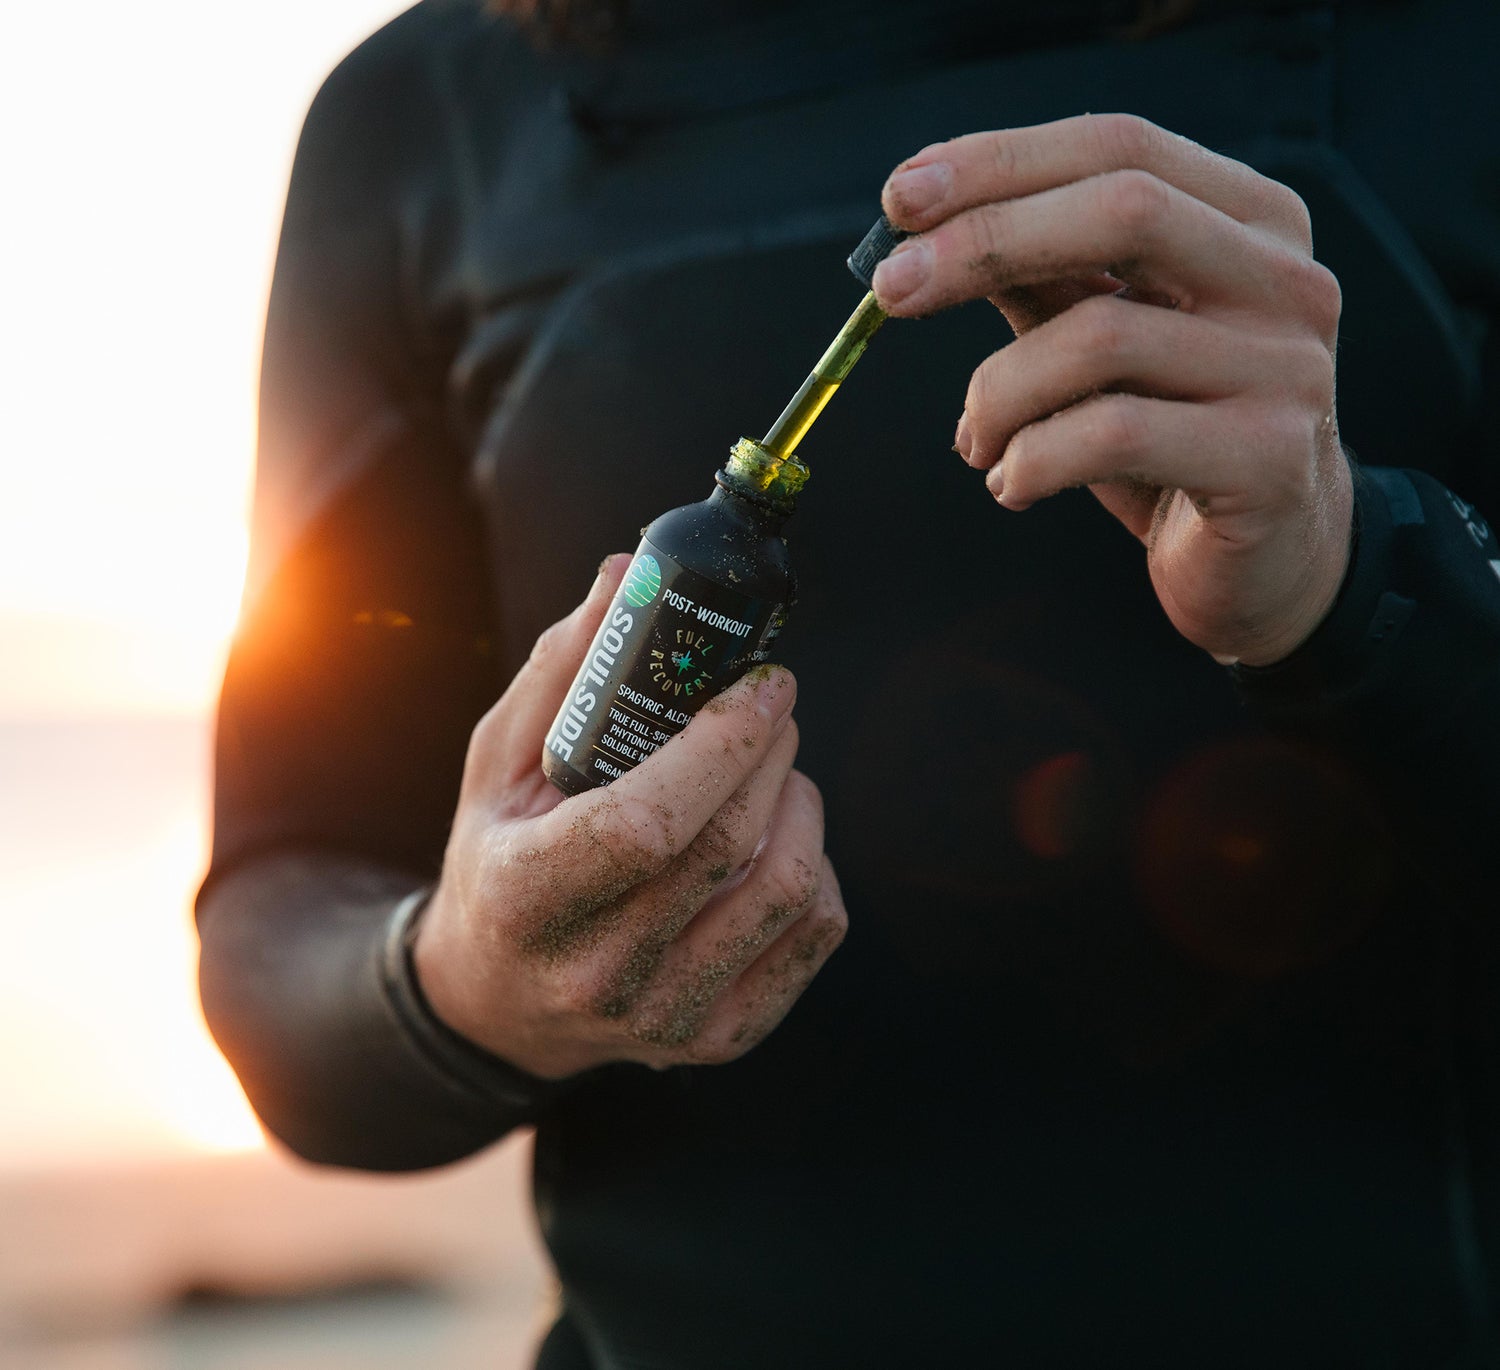 Image of a surfer holding Soulside 2oz recovery tincture, an organic herbal extraction for muscle build, fatigue, recovery, soreness, brain health and immunity.